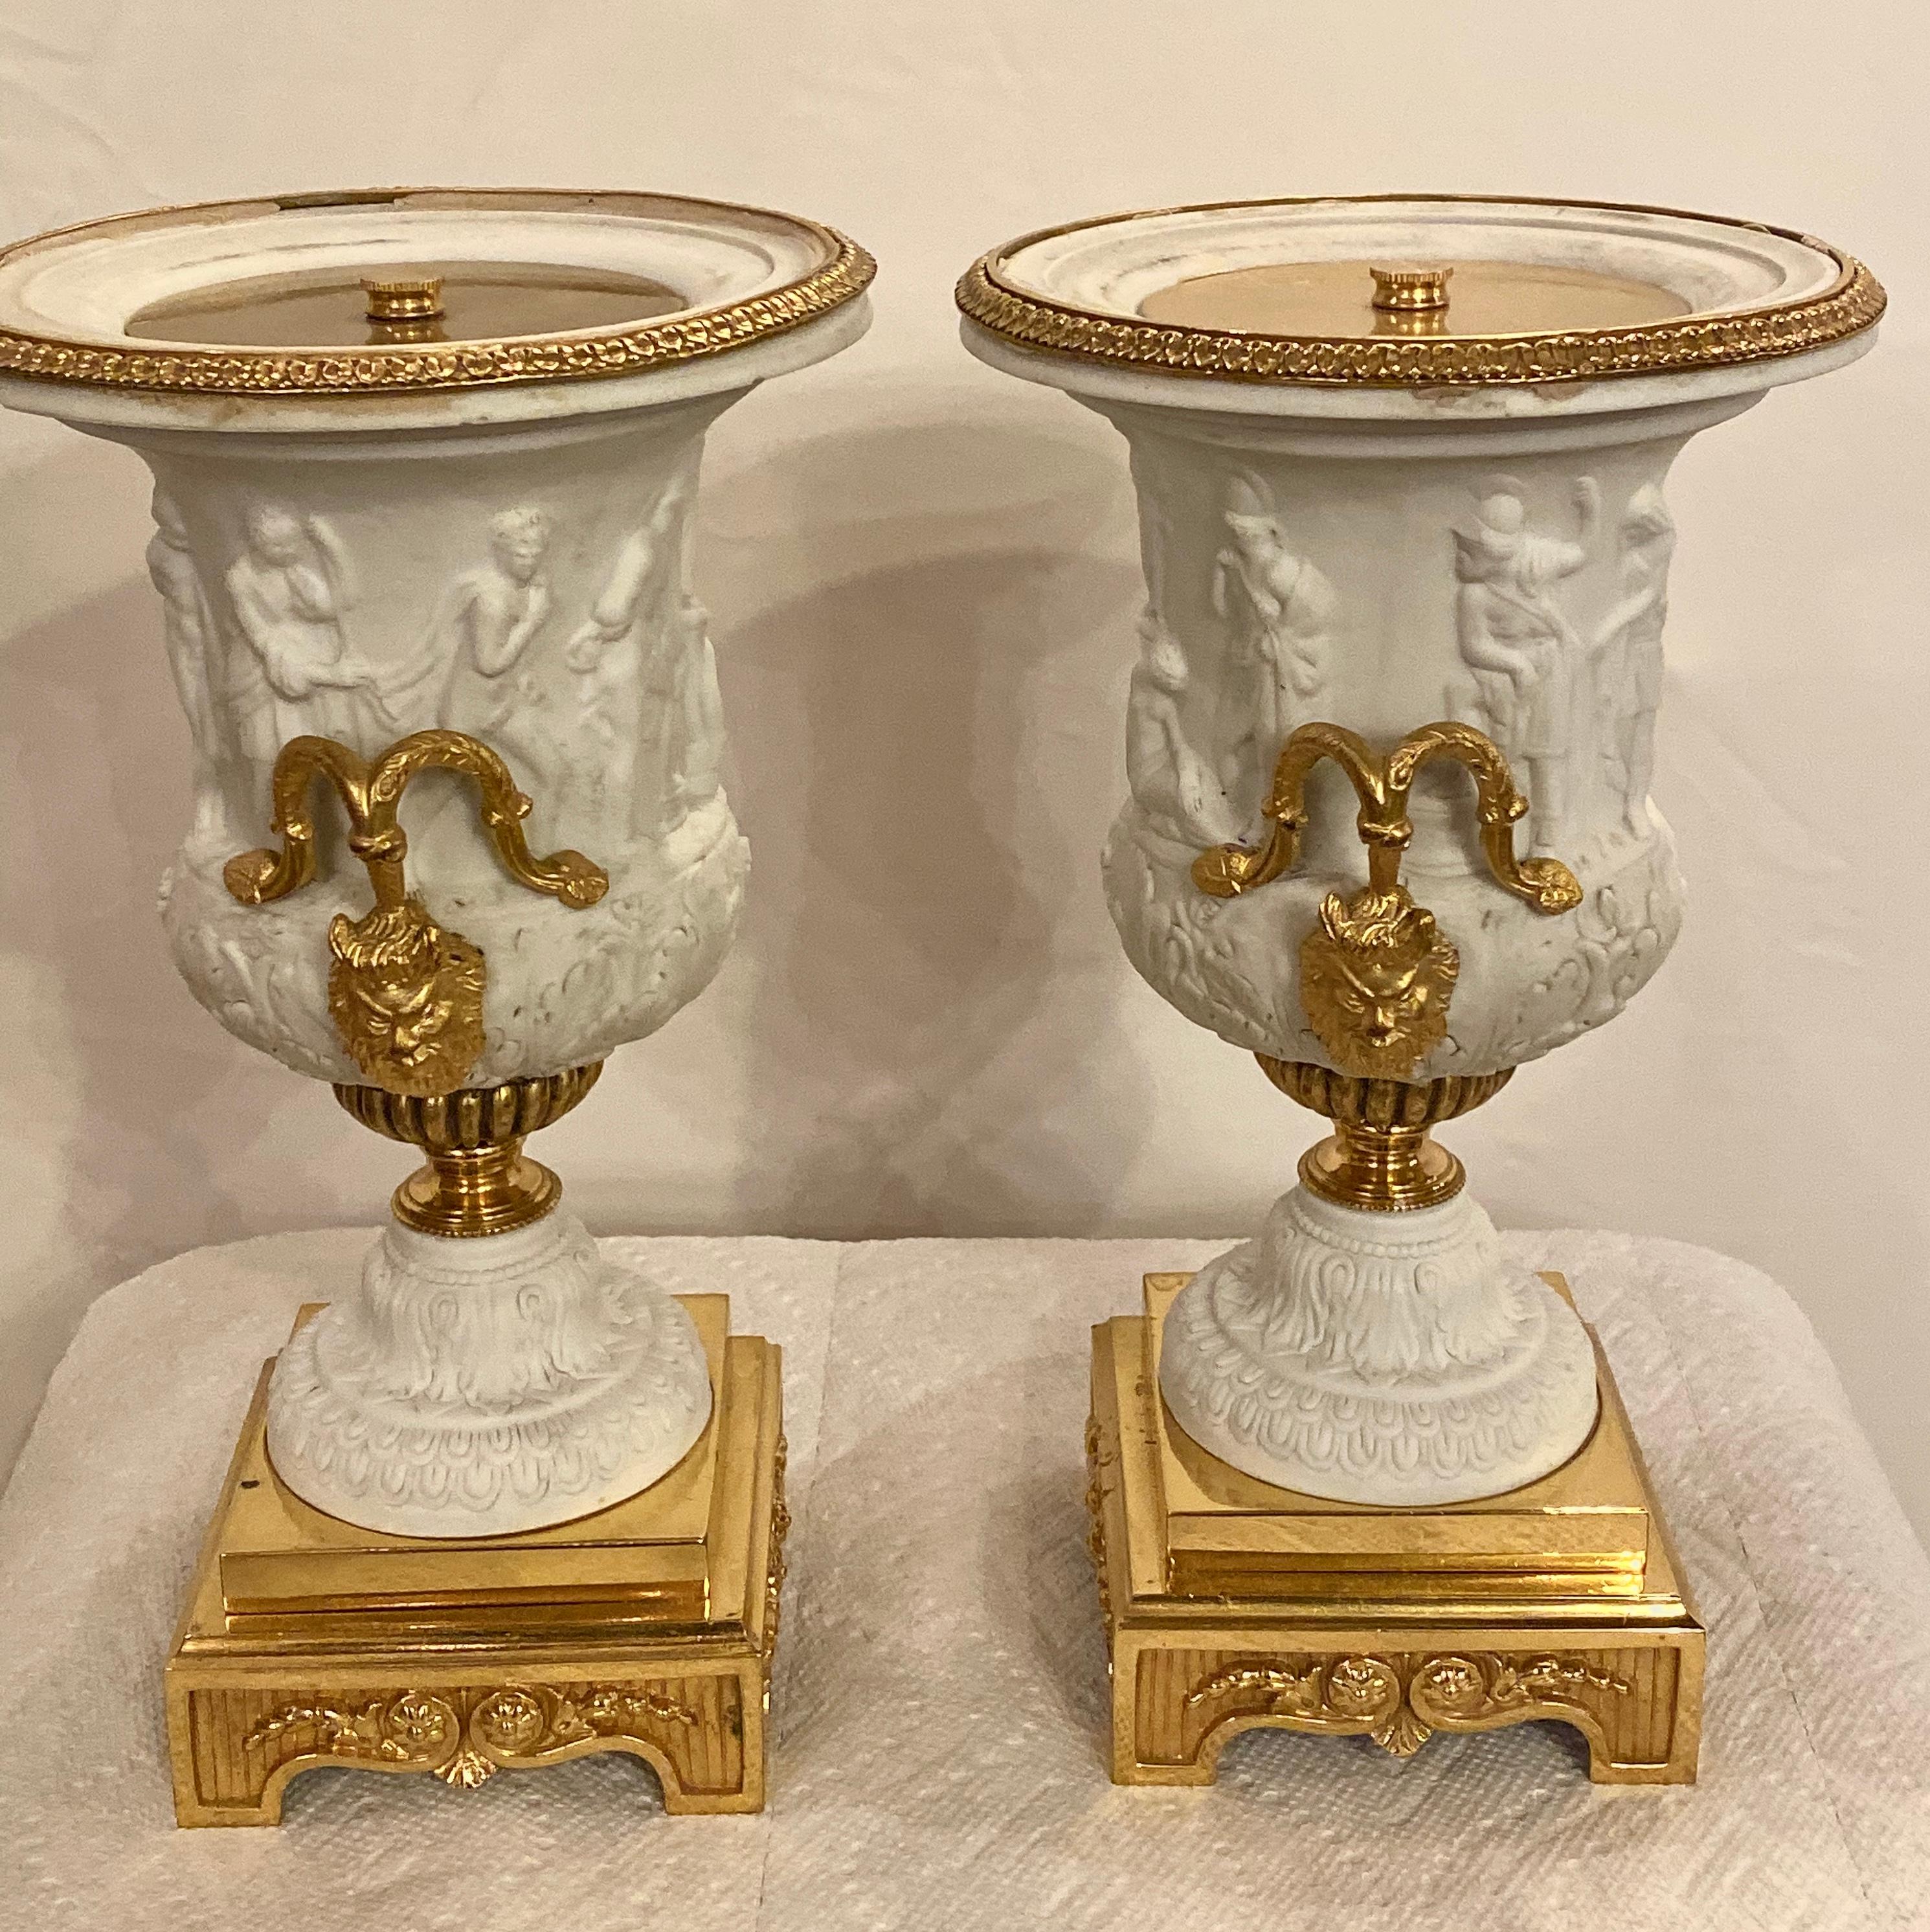 Neoclassical pair of Sevres Parian and doré bronze mounted Urns or Vases circa 1920s. This spectacular pair of table vases having doré bronze bases supporting a finely cast stamped Sevres Grecian style vase depicting various woman and men working or